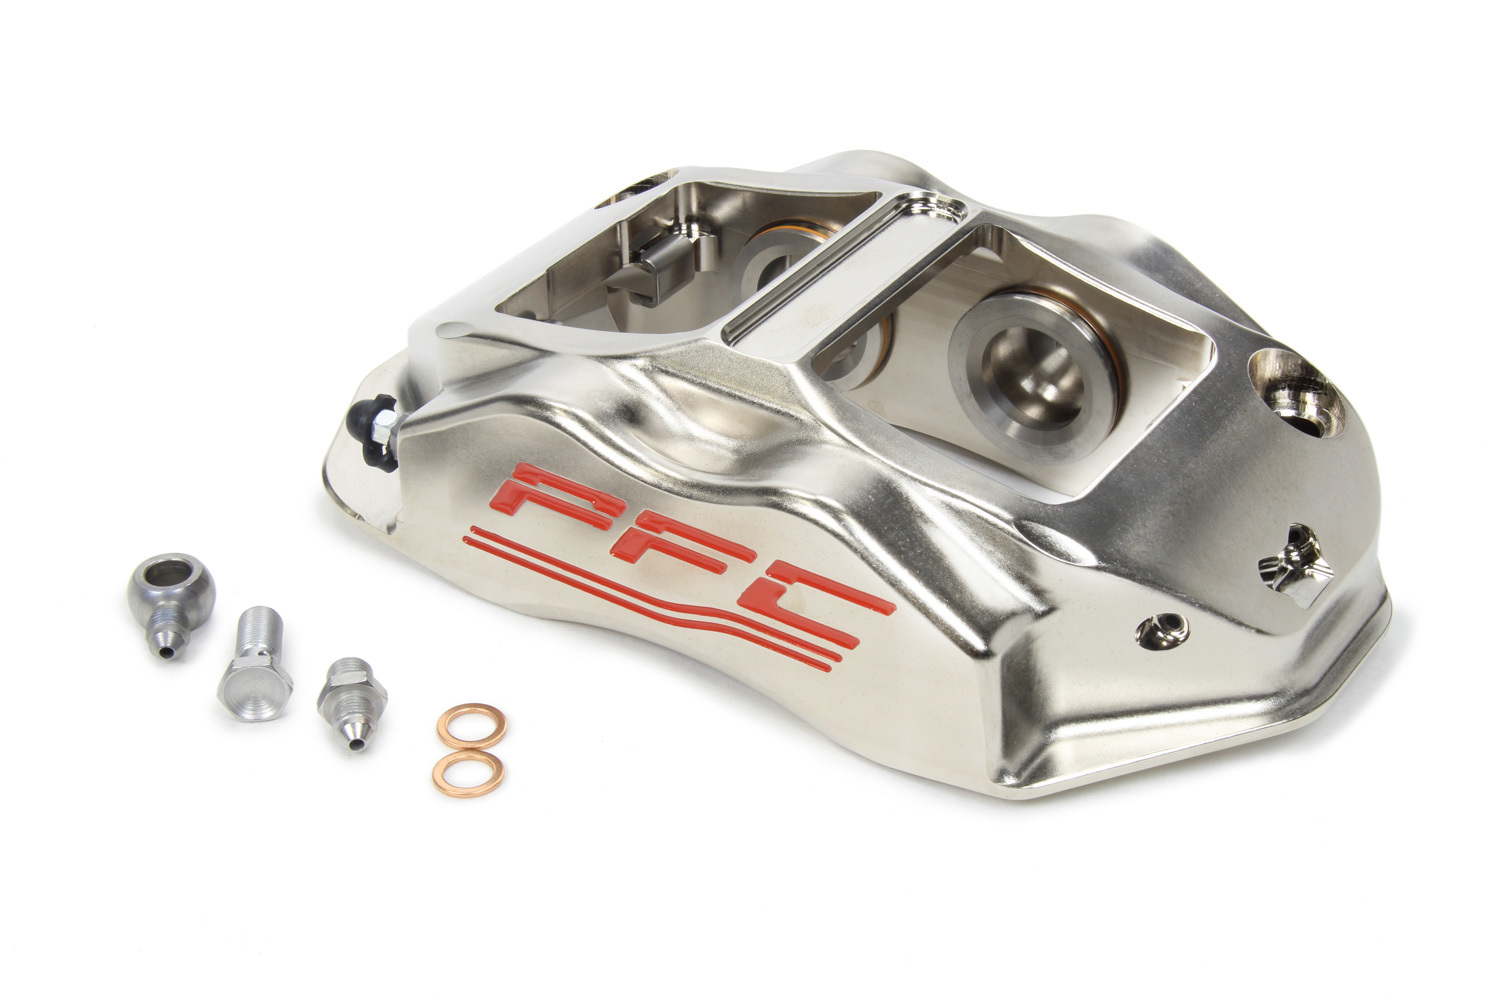 PFC Brakes 94.323.290.365.11 Brake Caliper, ZR94, Driver Side, Trailing, 4 Piston, Aluminum, Nickel Plated, 12.716 in OD, 1.250 in Thick Rotor, 7.00 in Radial Mount, Each